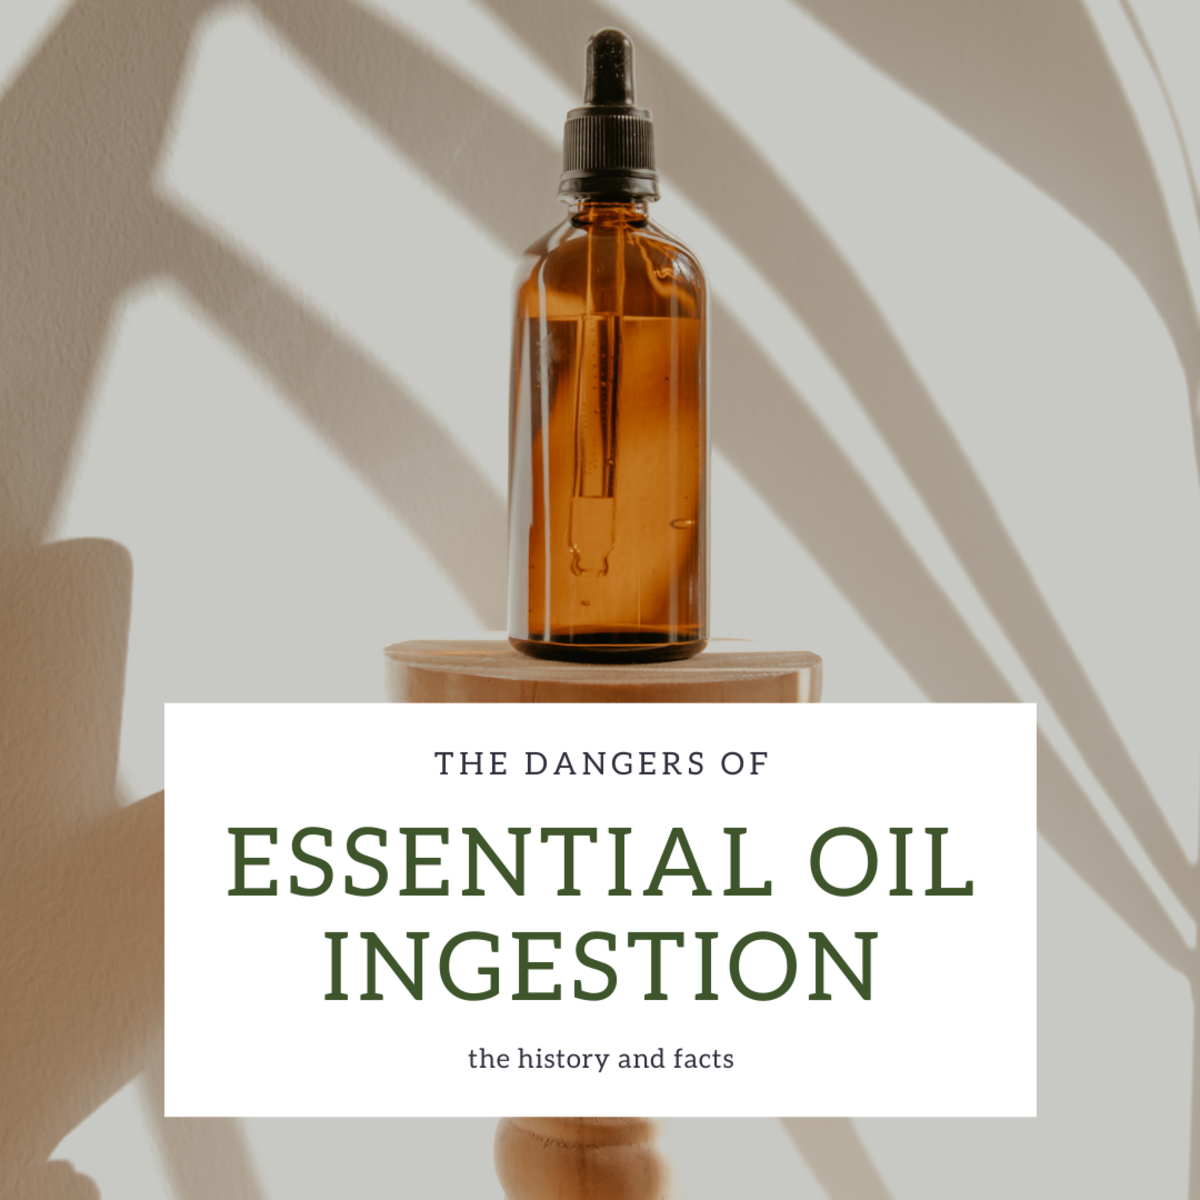 Essential Oil Ingestion: Documented Side Effects, Injuries, and Deaths